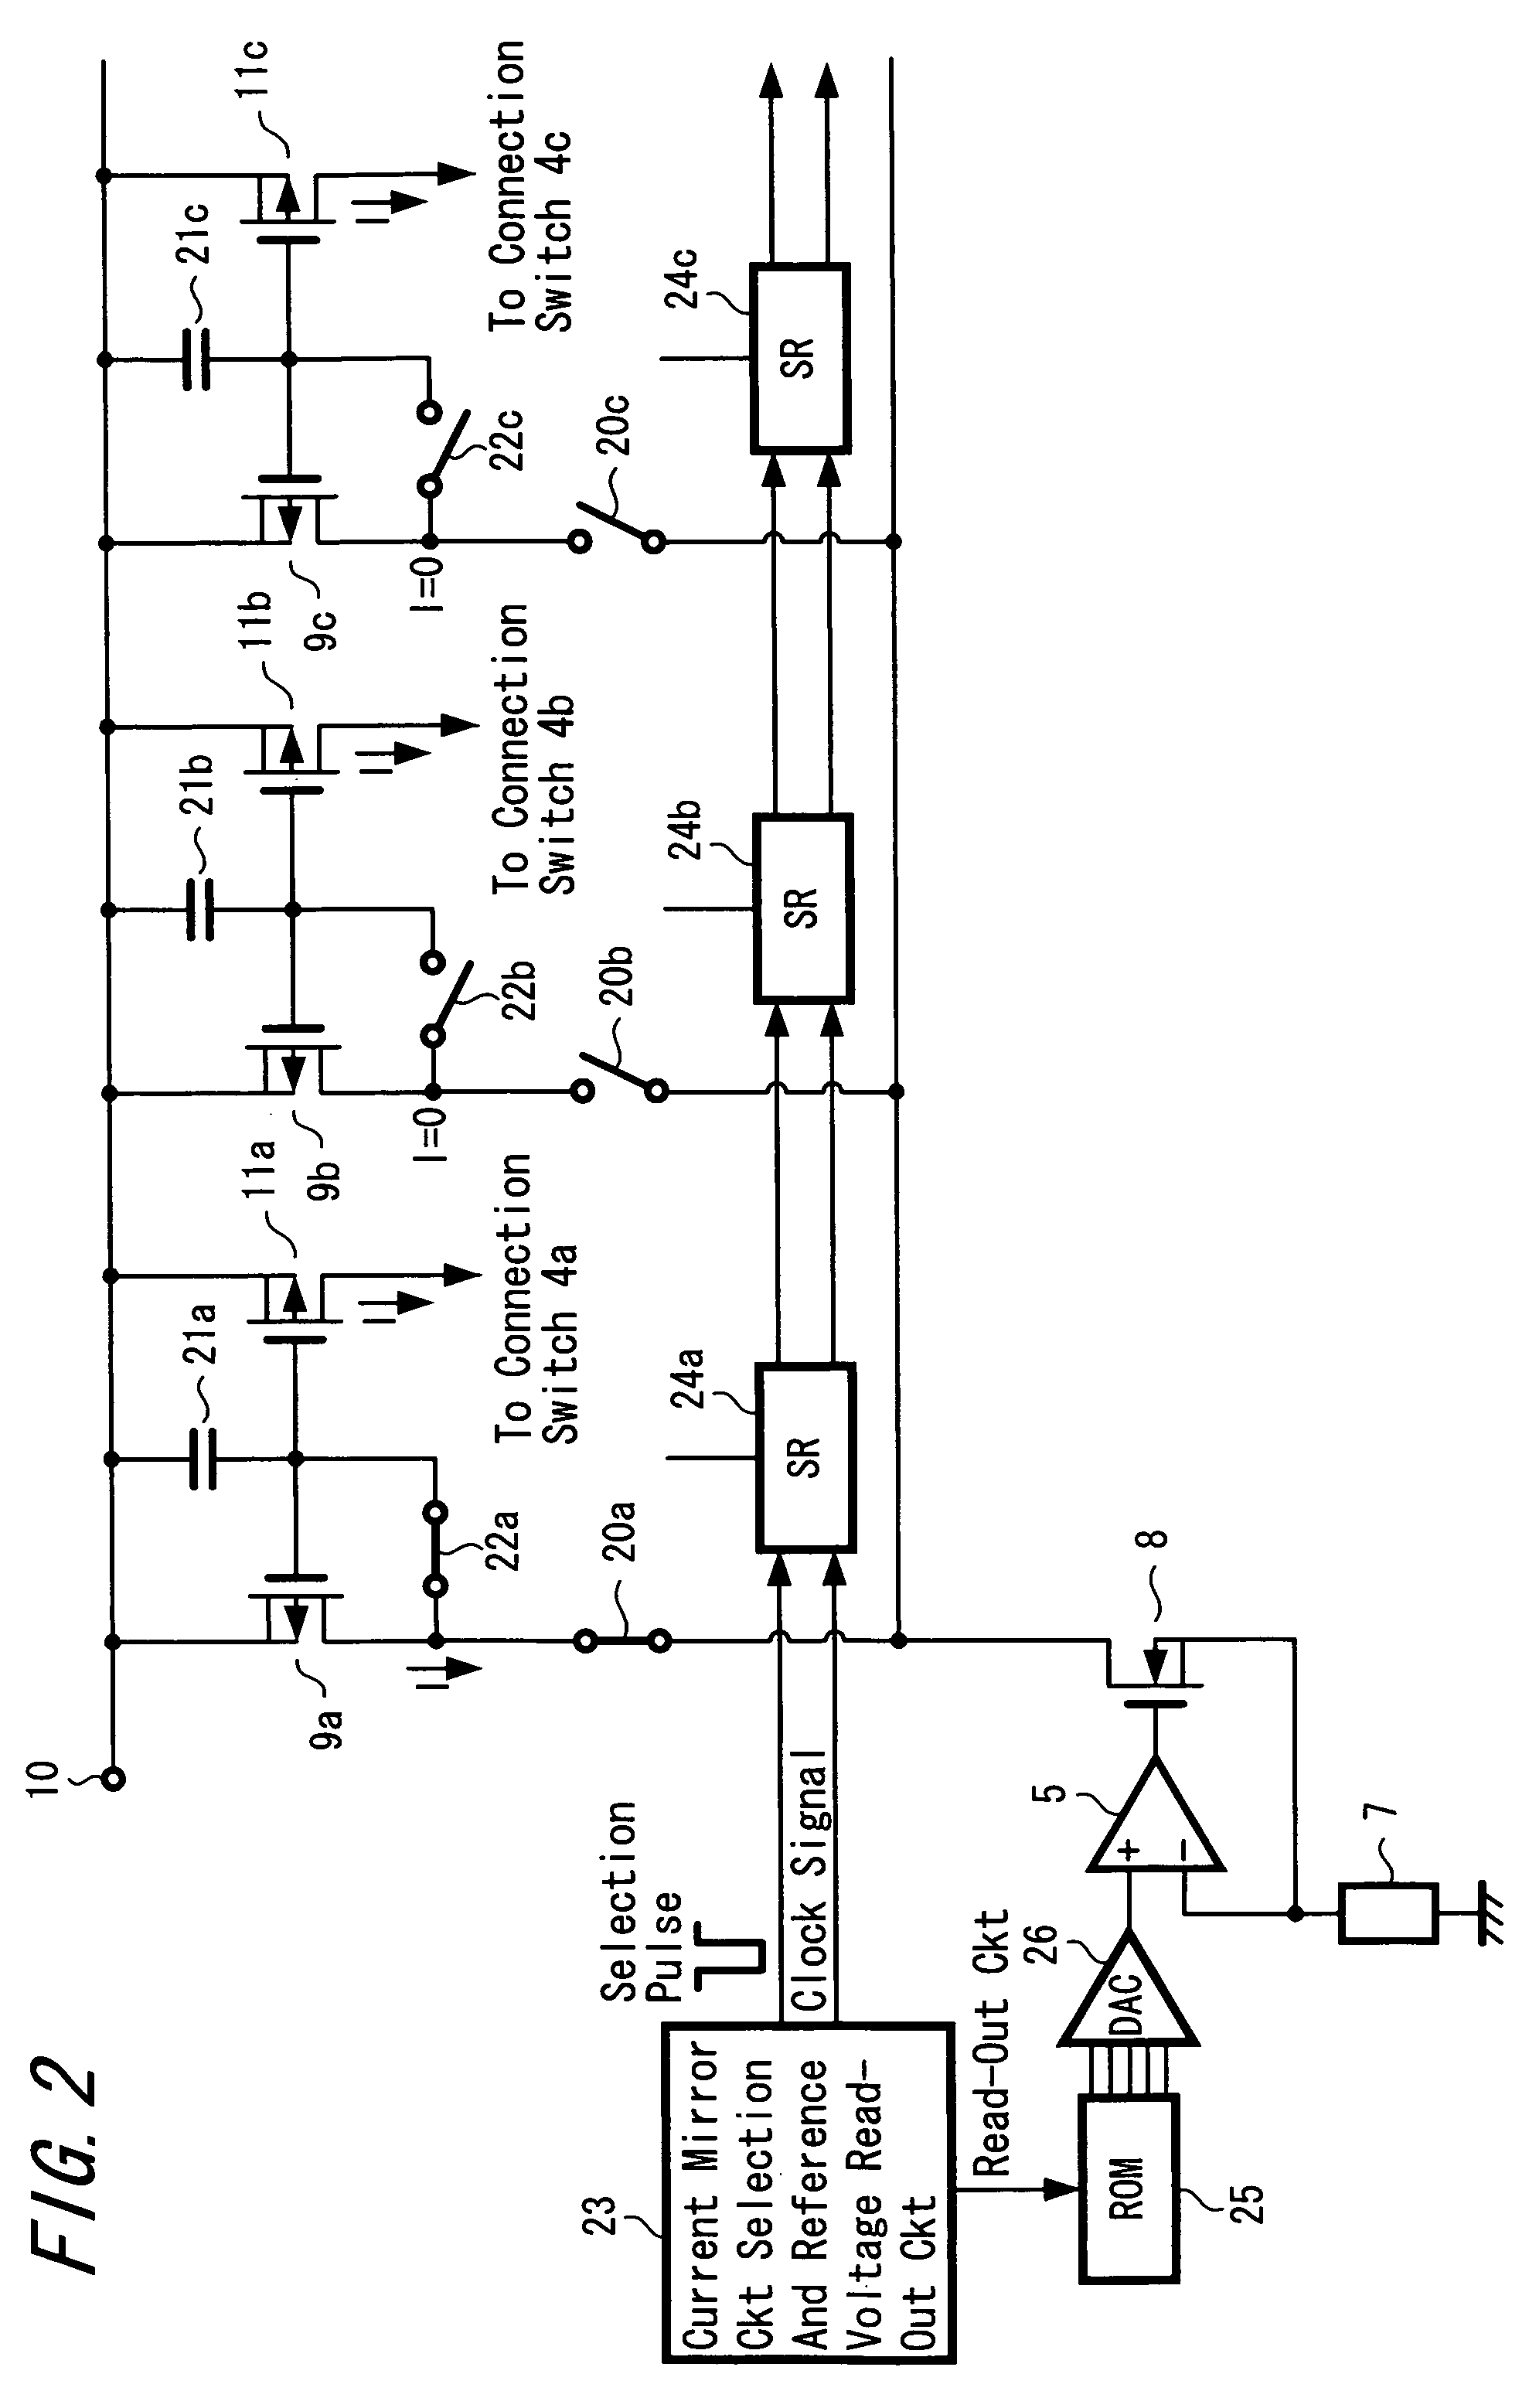 Constant current drive device